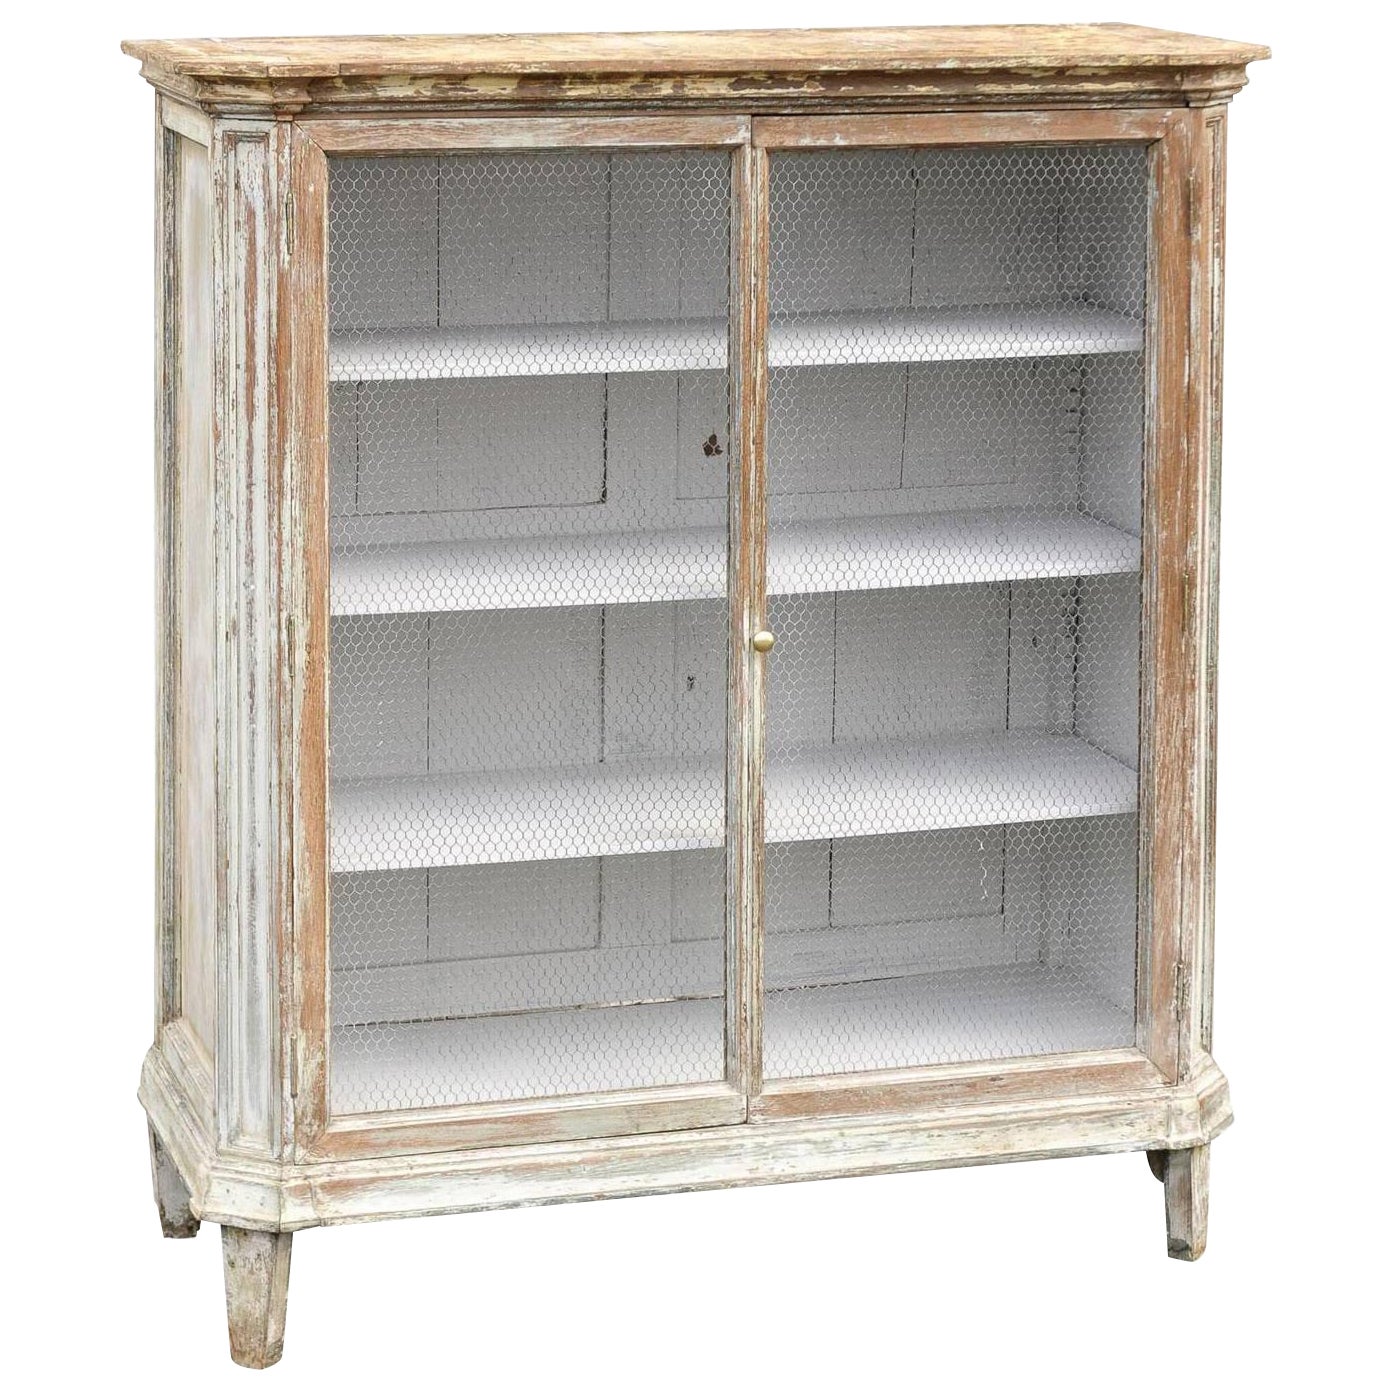 French Mid-19th Century Painted Cabinet with Chicken Wire Doors